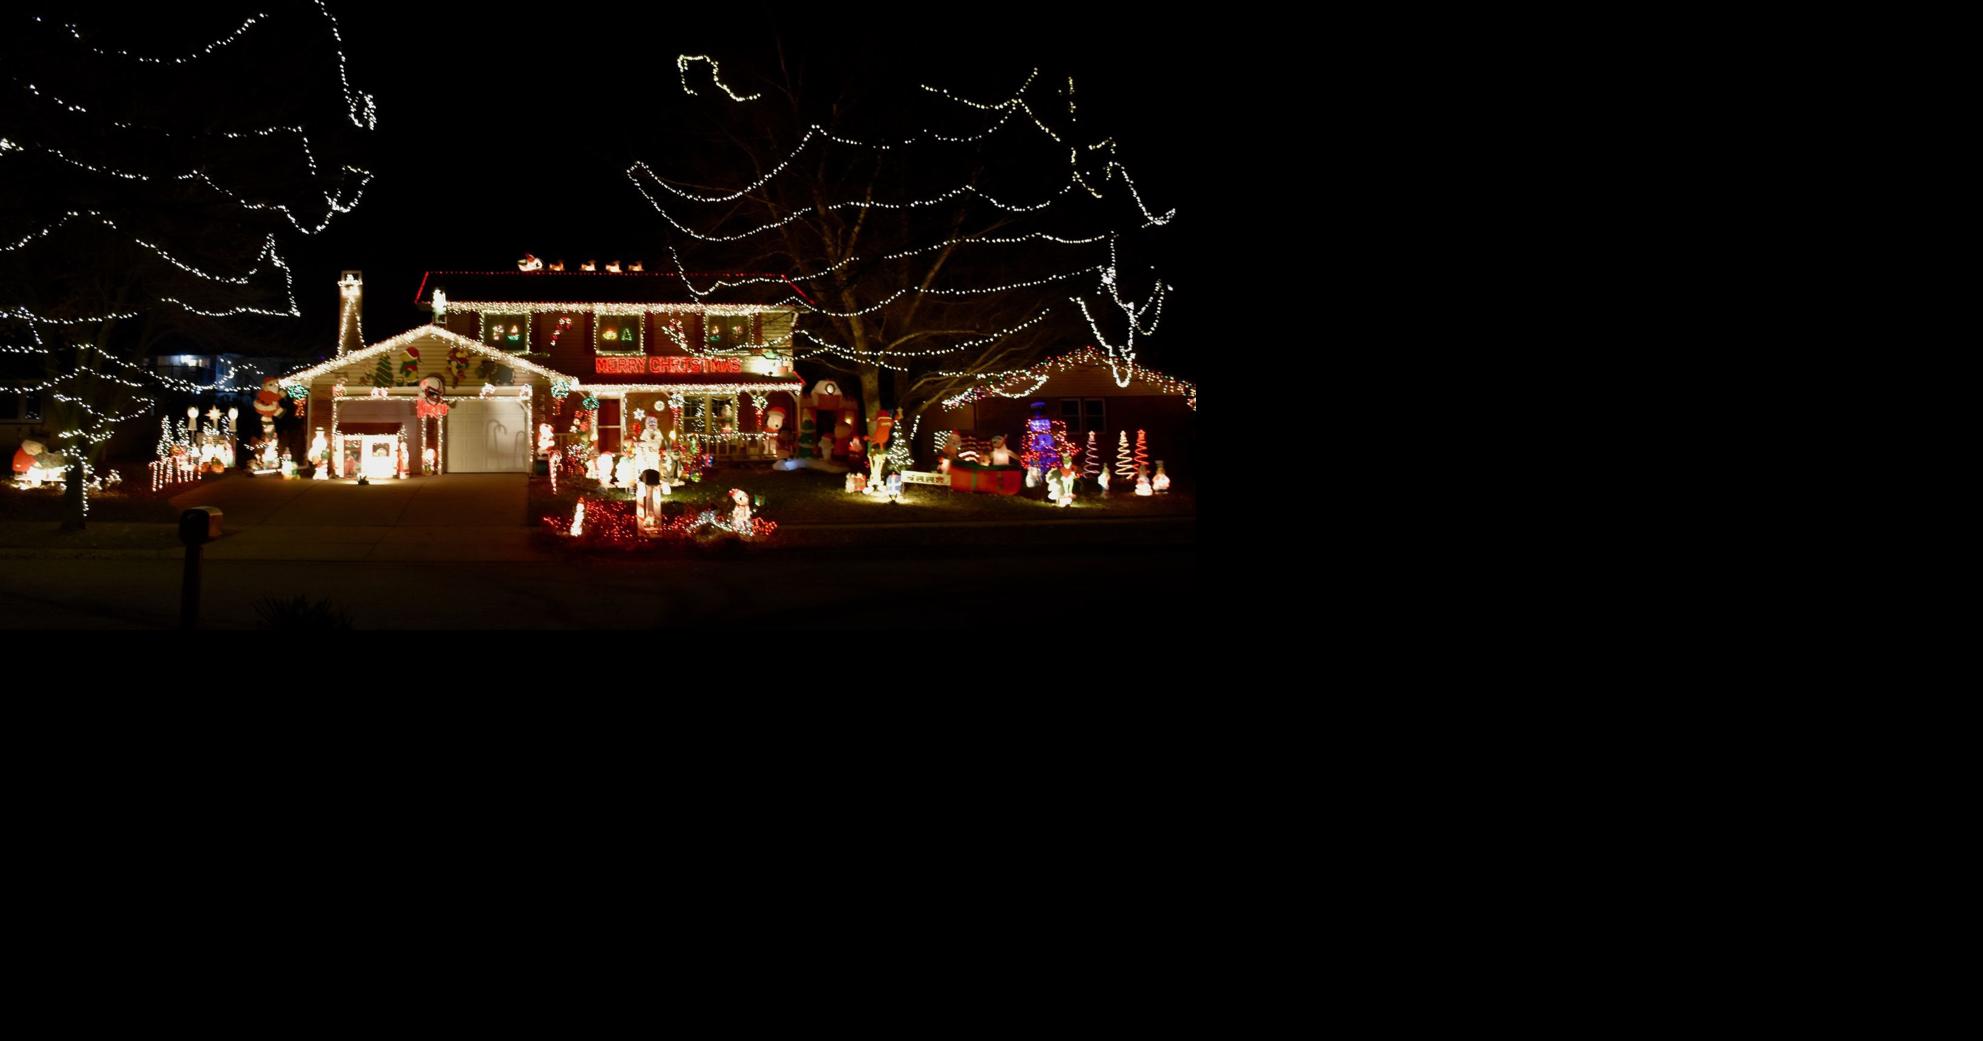 Check out these holiday lights displays in Lincoln